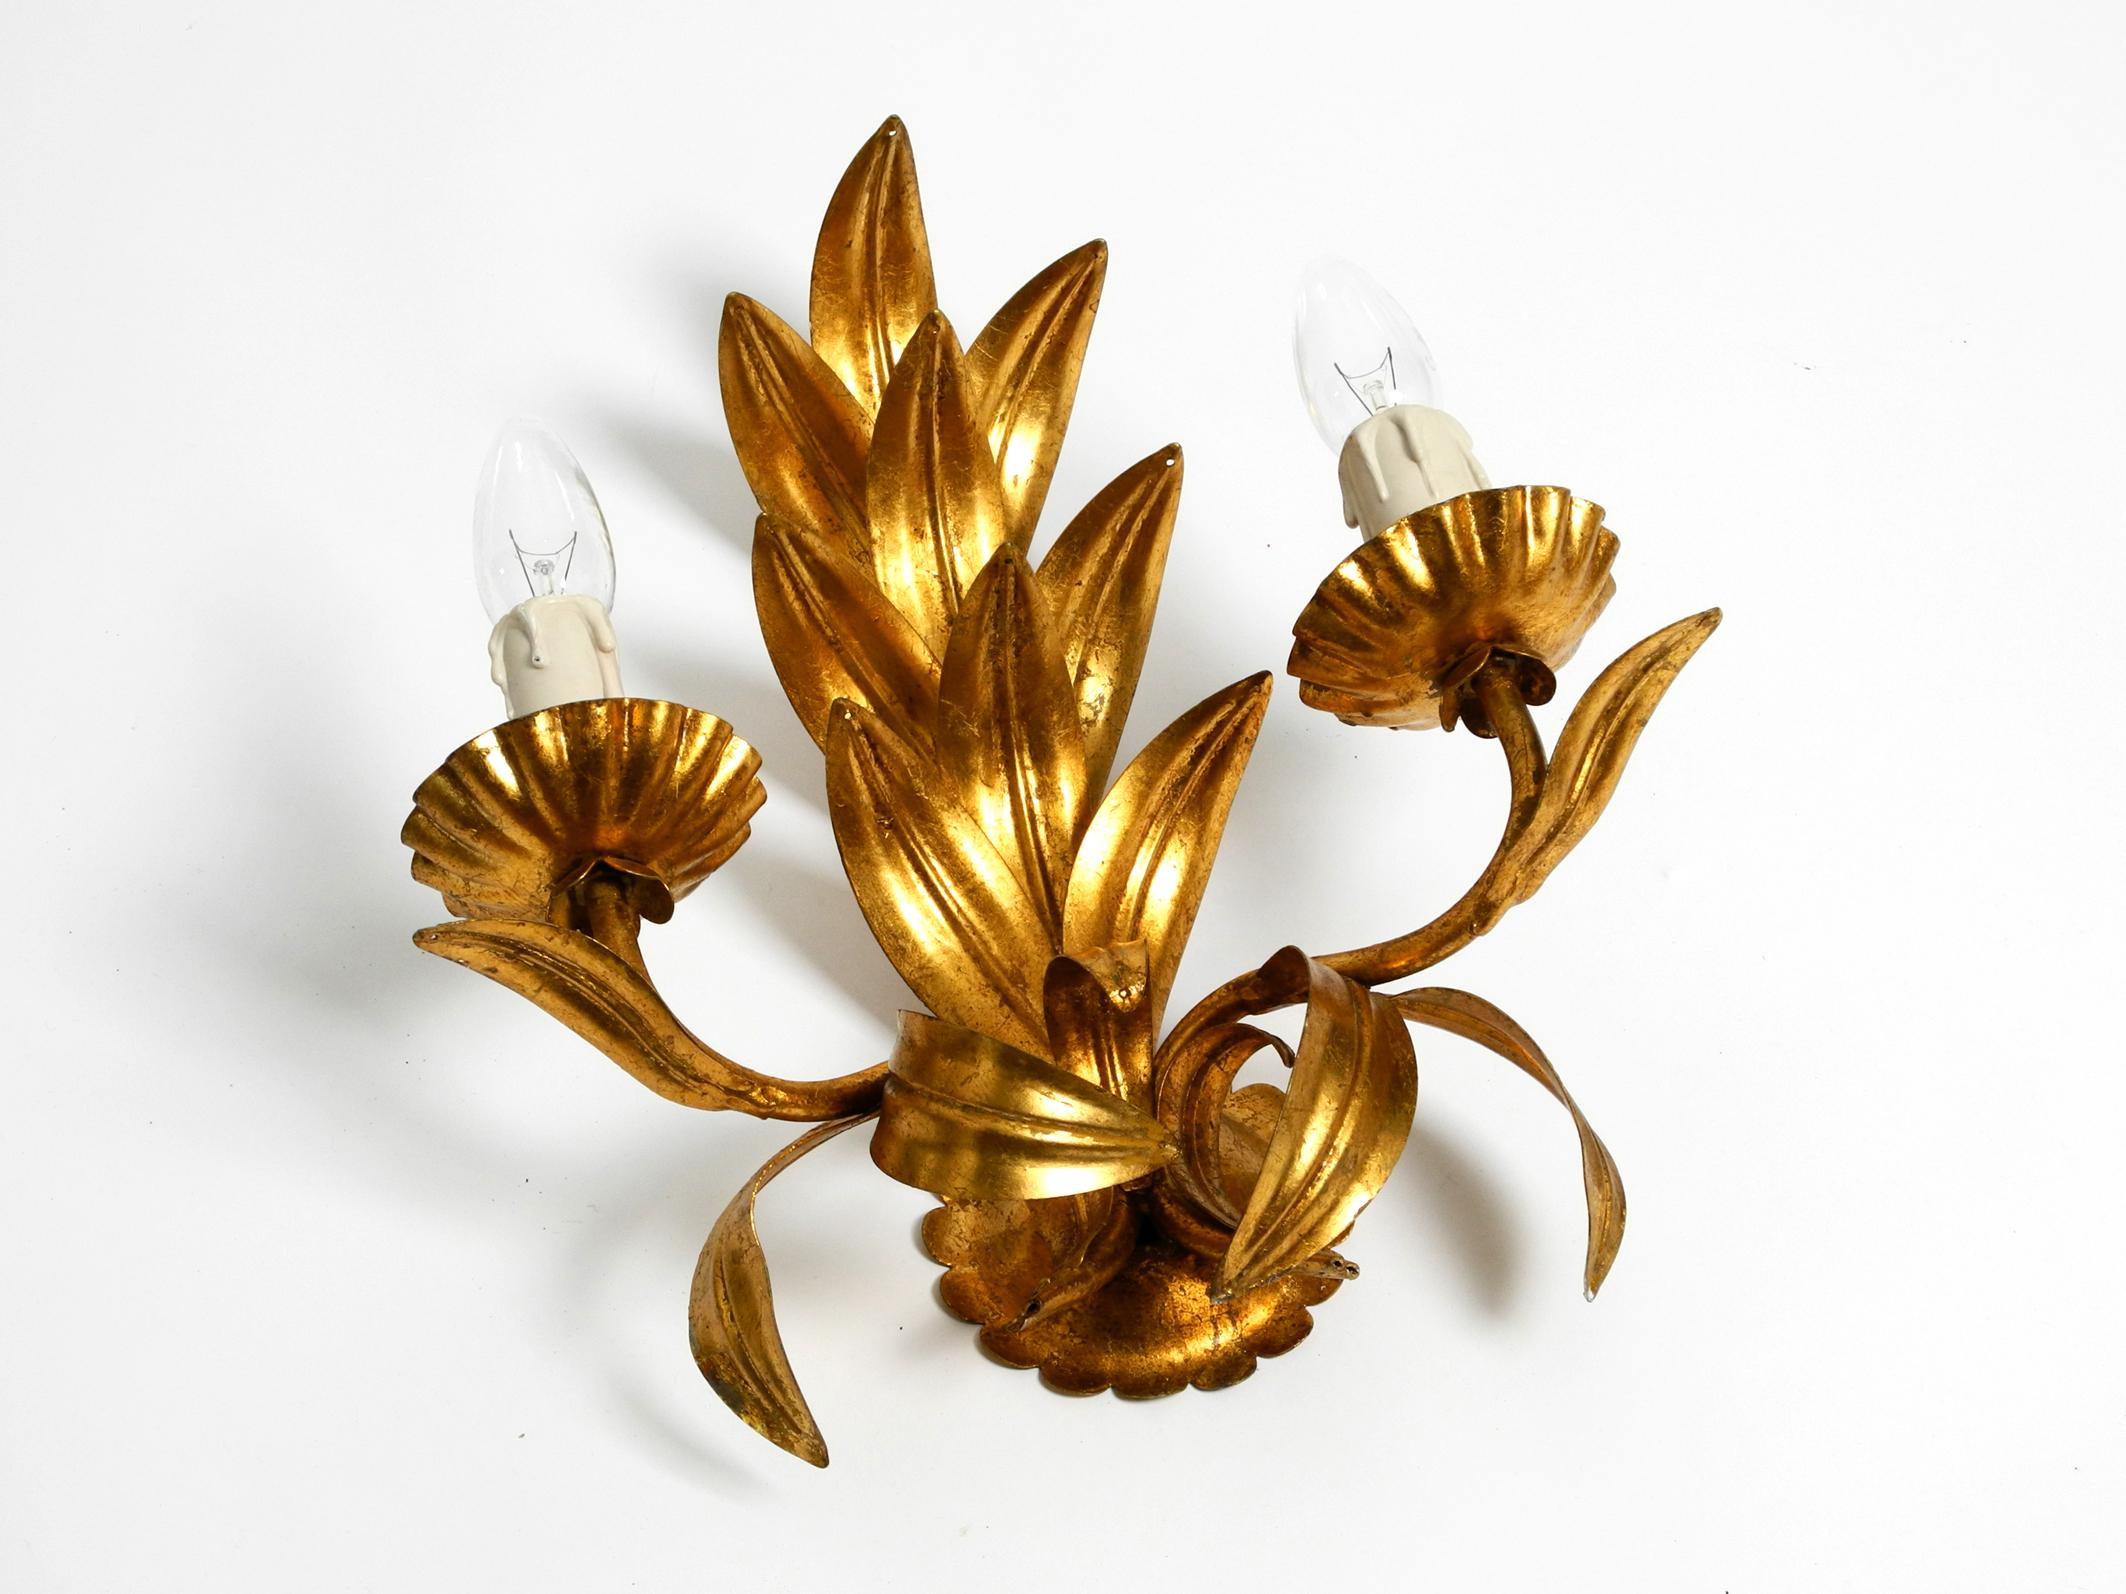 Rare 1970s large Florentine wall lamp with 2 sockets made in Italy.
Beautiful design with many details.
Many large curved leaves. Very high quality production.
Entire lamp is made of heavy gilded iron.
Fully functional and 100% original.
All